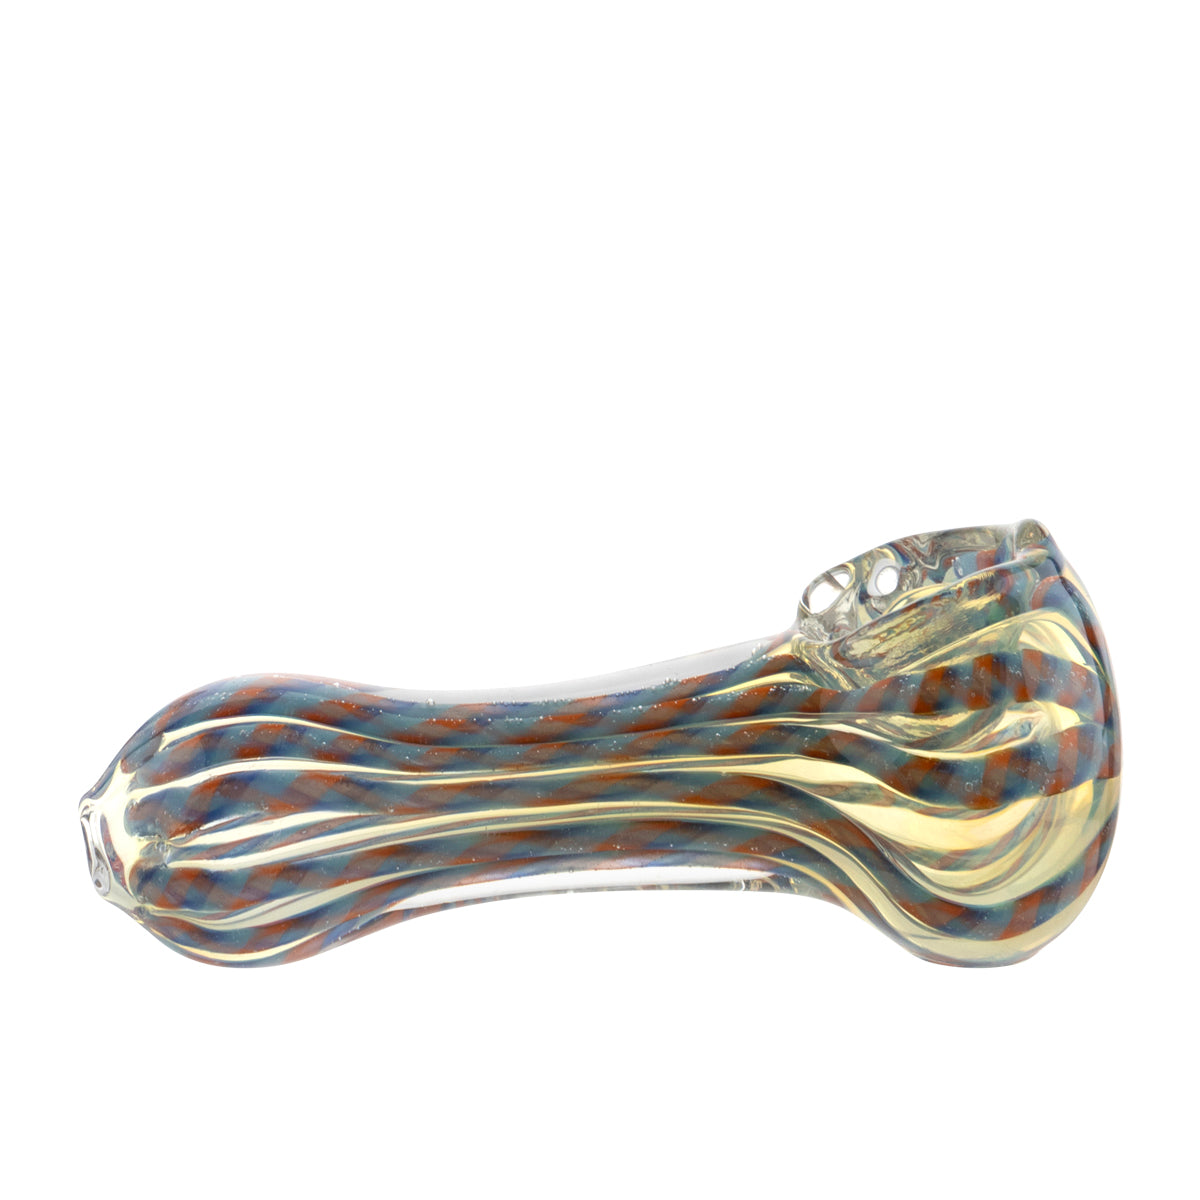 Hand Pipe | Classic Glass Spoon Heavy Fumed Hand Pipe | 3"-4" - Glass - MIX Glass Hand Pipe Biohazard Inc   